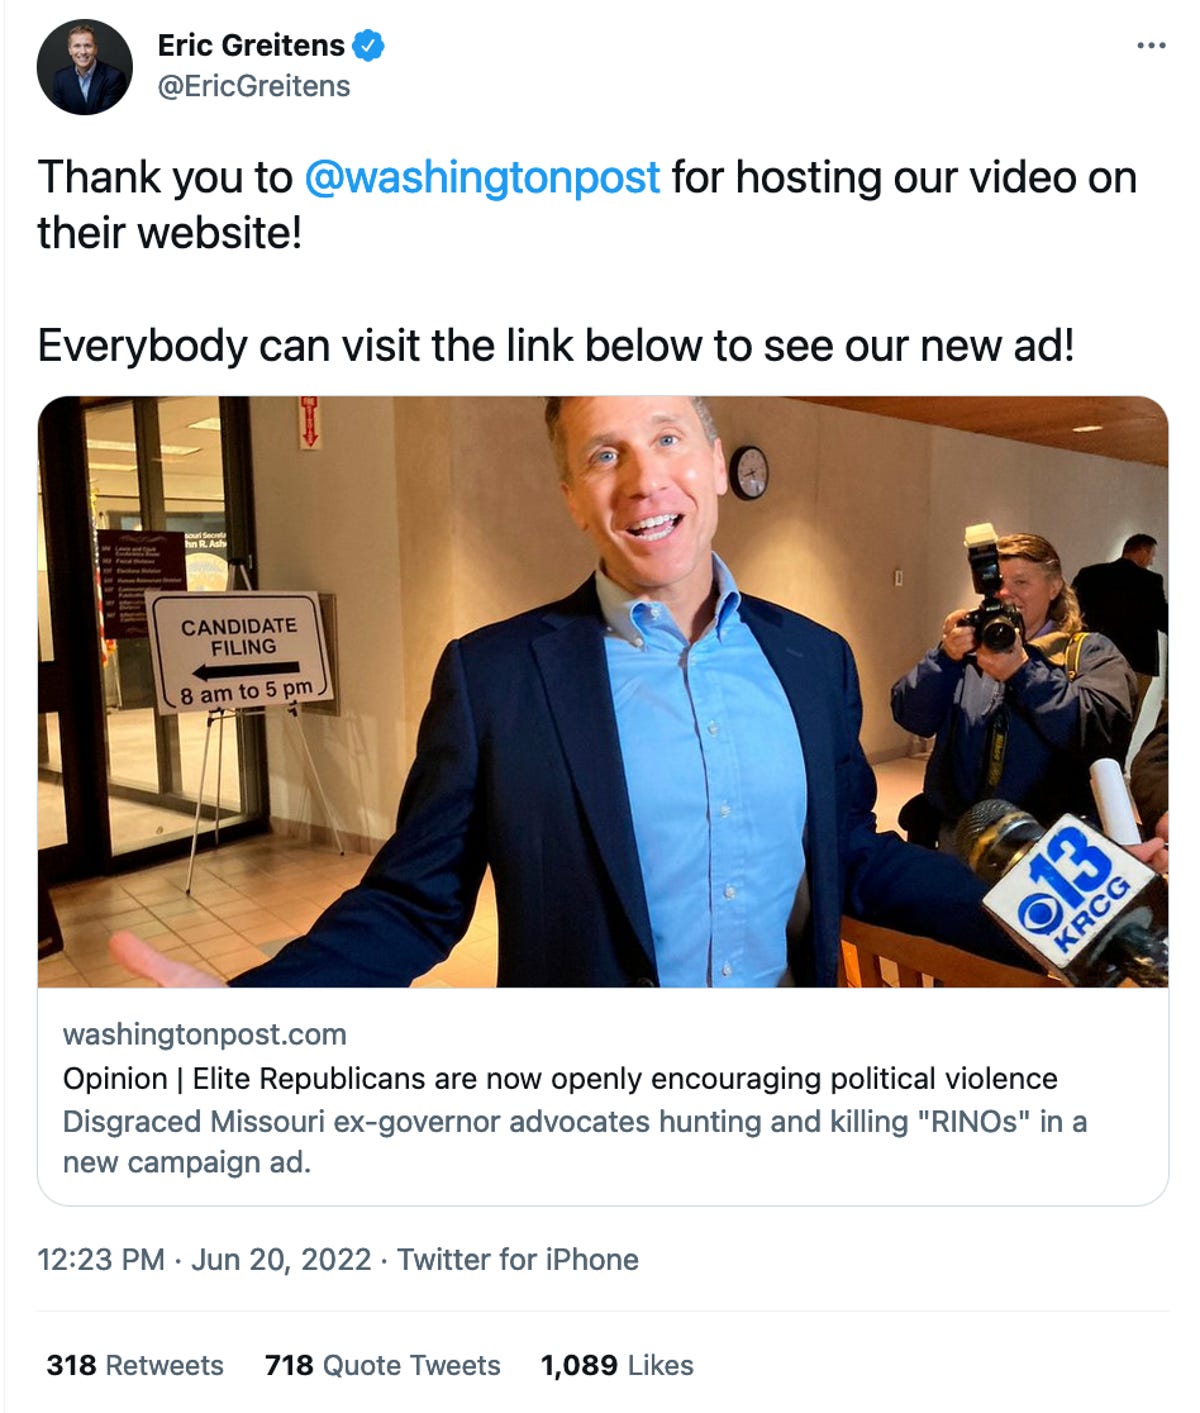 A tweet from Eric Greitens thanking the Washington Post for publishing his video.